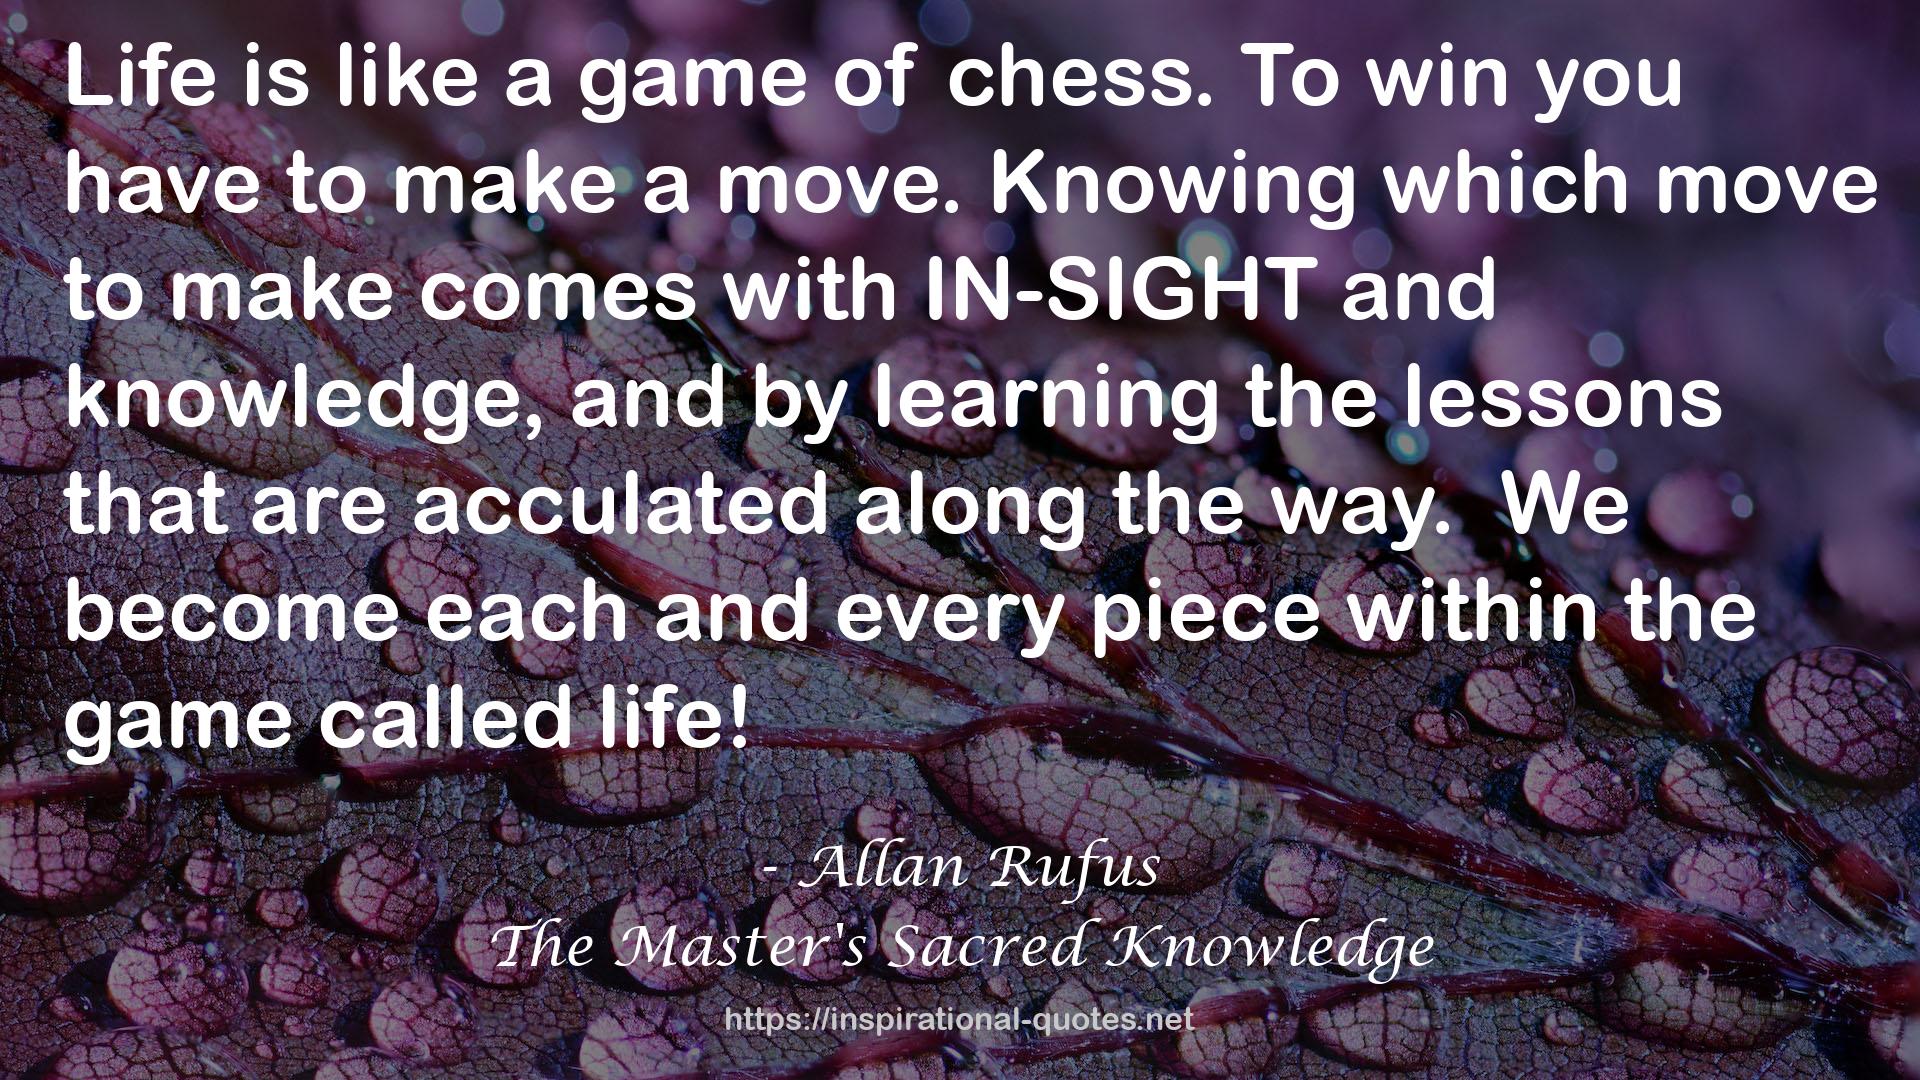 The Master's Sacred Knowledge QUOTES